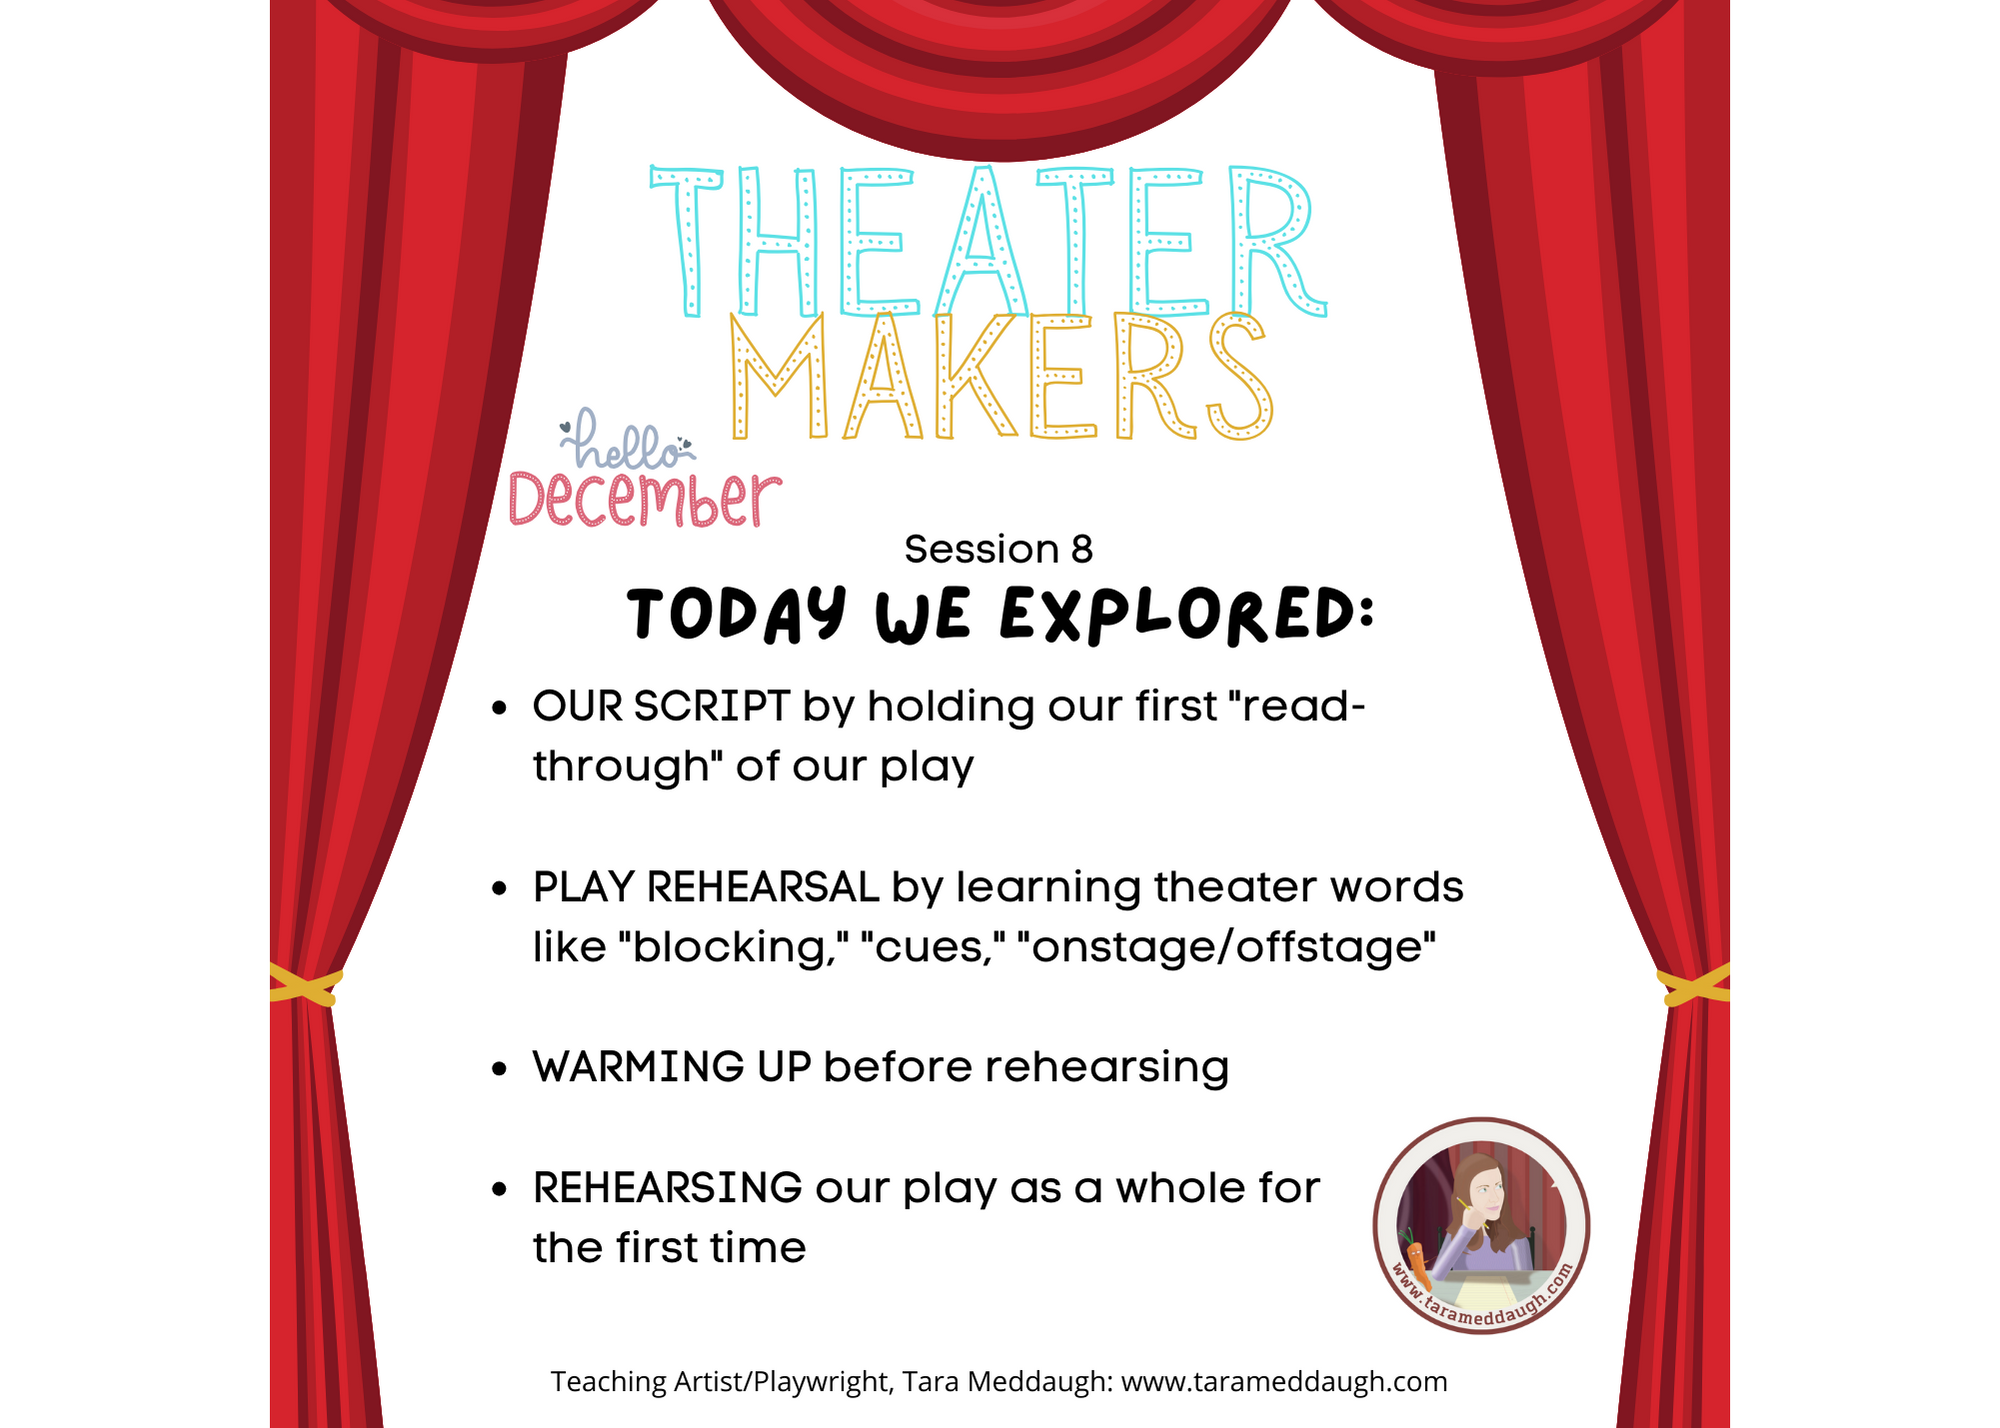 Copy of Session 8 theater makers review.png